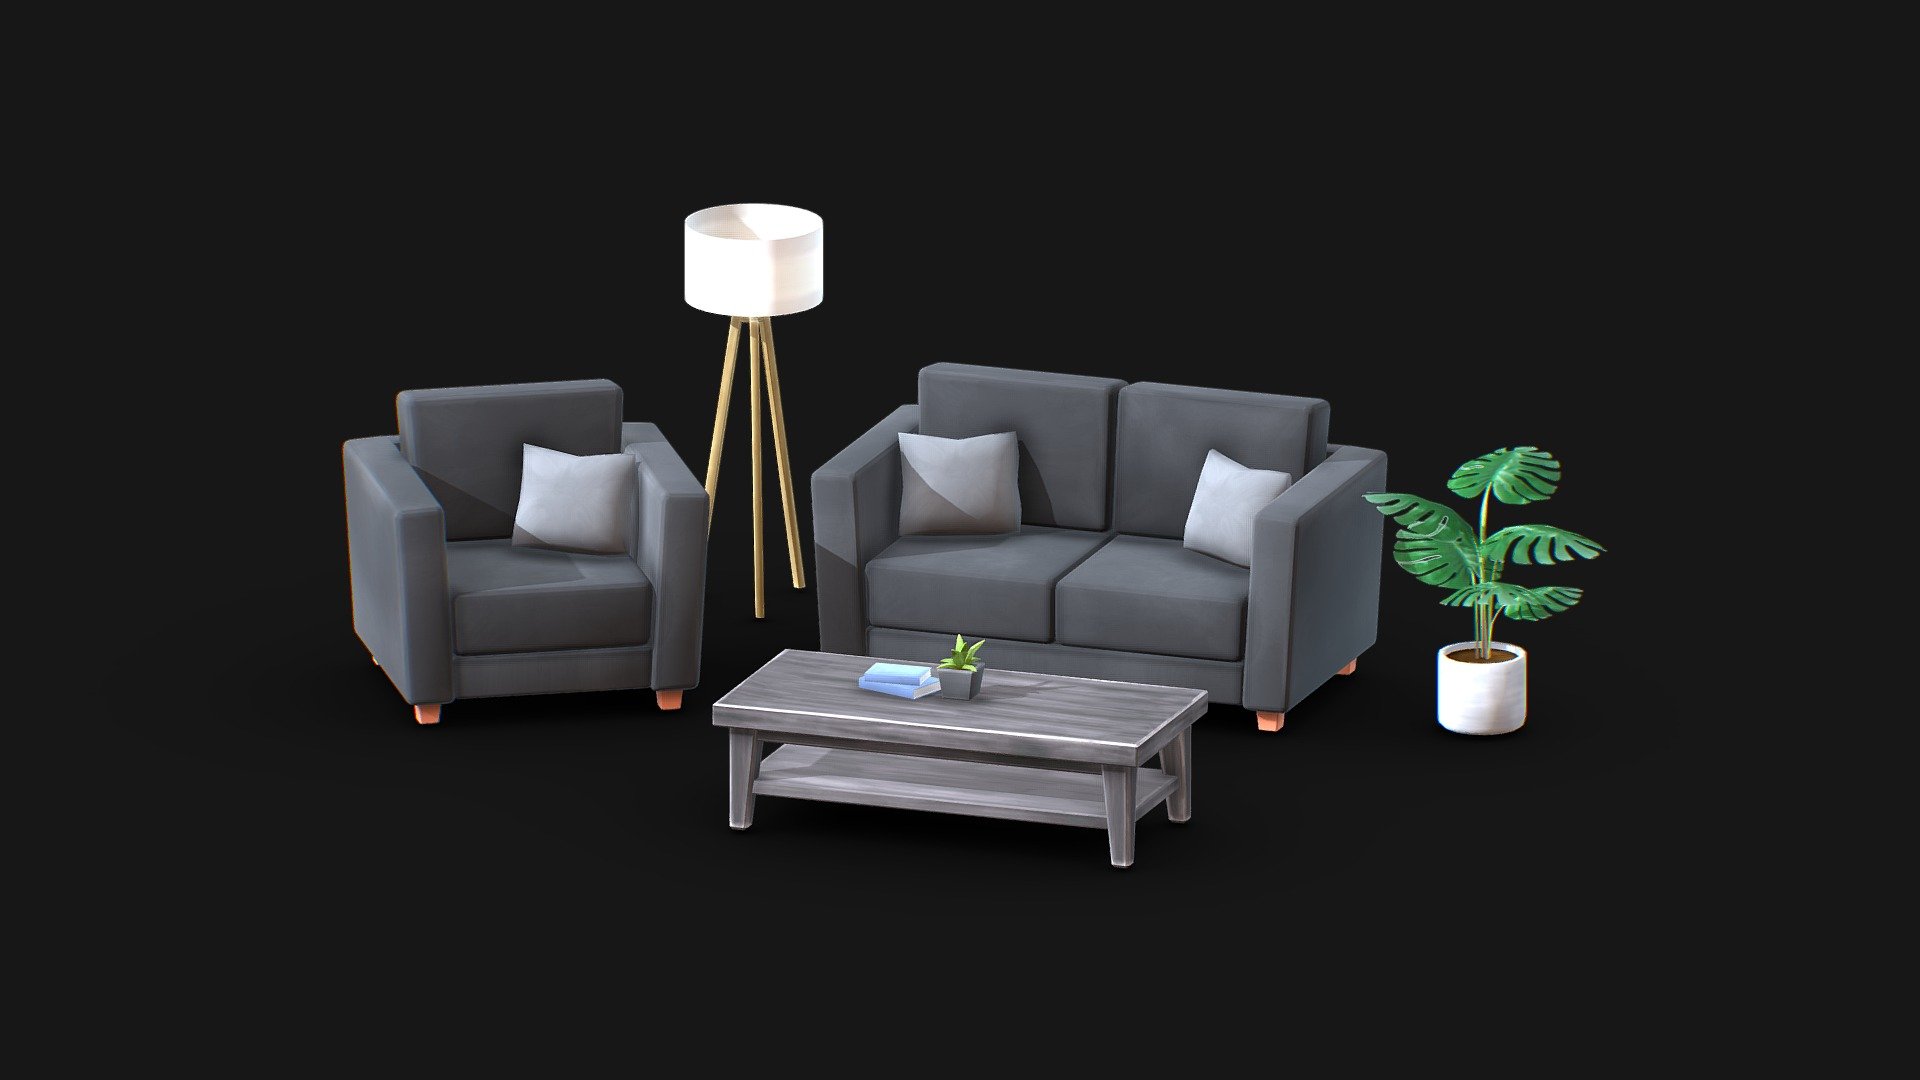 This pack contains eight individual asset models that can be used and modified in your 3D projects.

Included in this pack are:
    1. Double Couch
    2. Single Couch
    3. Coffee Table
    4. Large Plant
    5. Small Plant
    6. Pillow
    7. Floor Lamp
    8. Book

This pack has been set up to use the blender asset browser and can easily be added to your asset library.
Do so by moving the blend file into your asset browser directory and searching for the Living Room Asset Pack catalog. 

If you are unsure about this process, please refer to the guide below or reach out to me on instagram @benjilabs

https://wiki.blender.org/wiki/Reference/Release_Notes/3.0/Asset_Browser

Individual FBX files are also included. 

Benji Labs 2022
joelbenji.com - Stylised Living Room | Blender Asset Pack - Download Free 3D model by Benji Labs (@benjilabs) 3d model